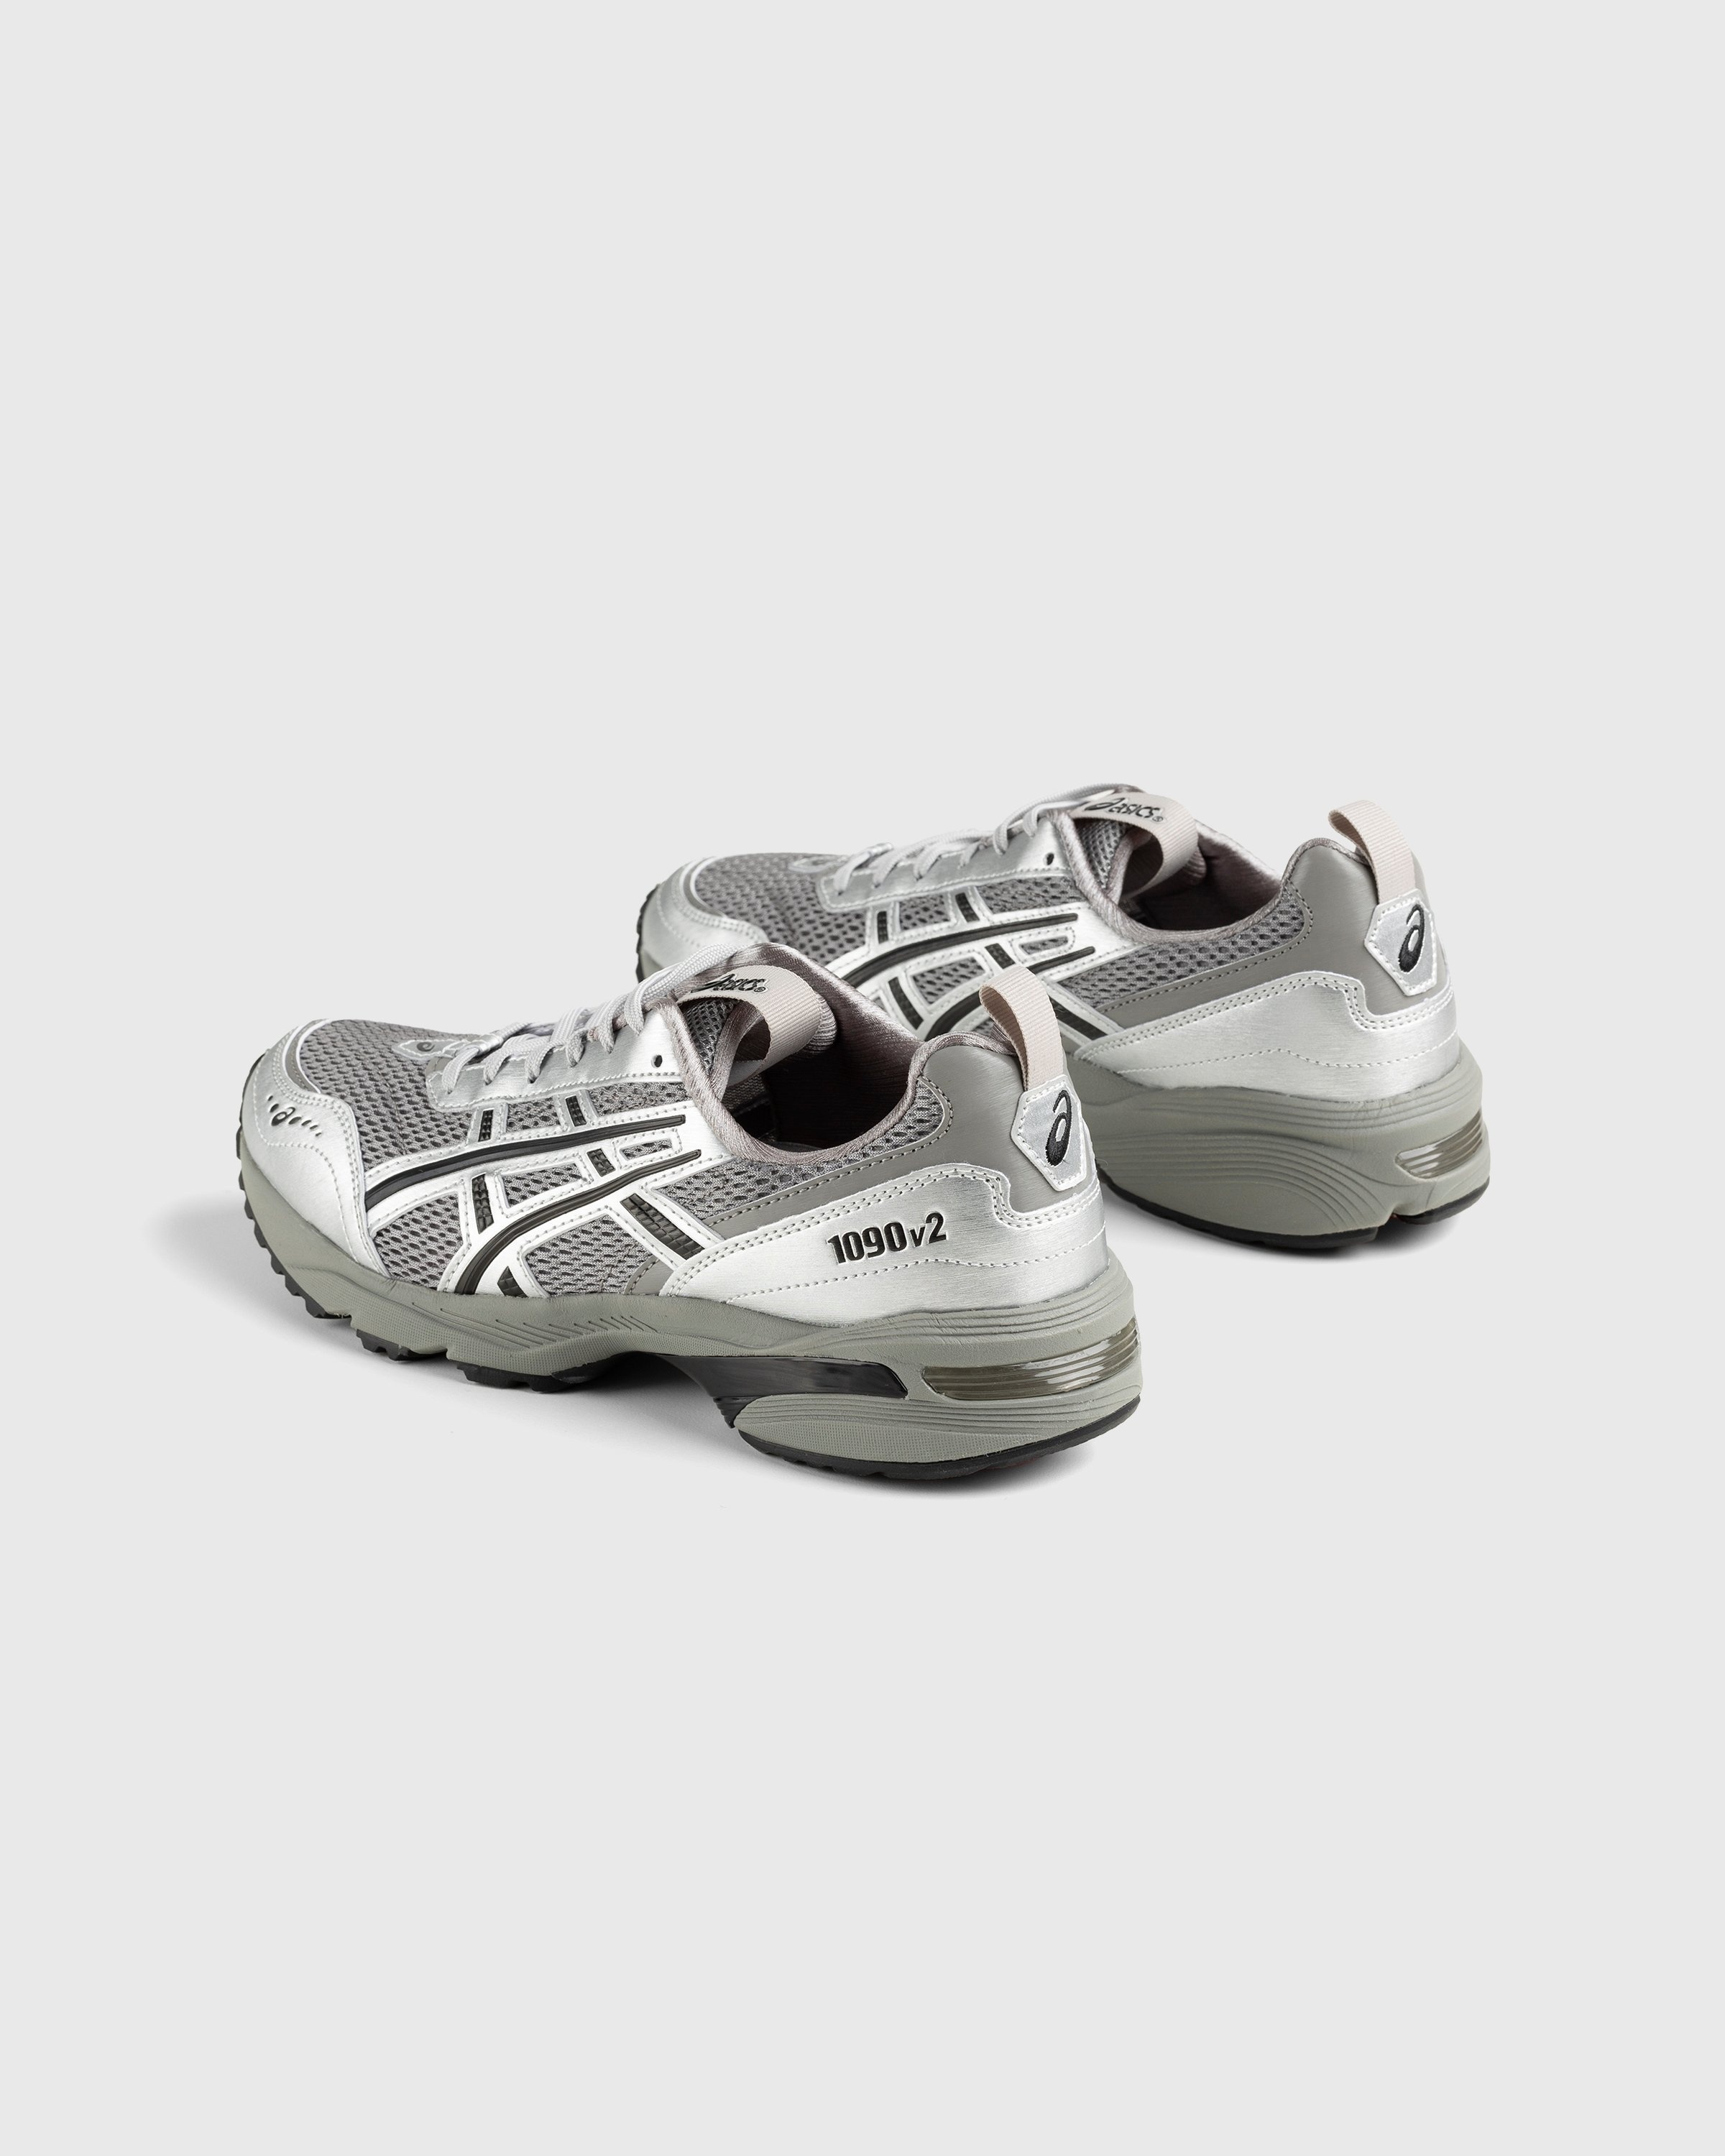 asics – GEL-1090v2 Freja Wewer Edition Silver - Low Top Sneakers - Silver - Image 4